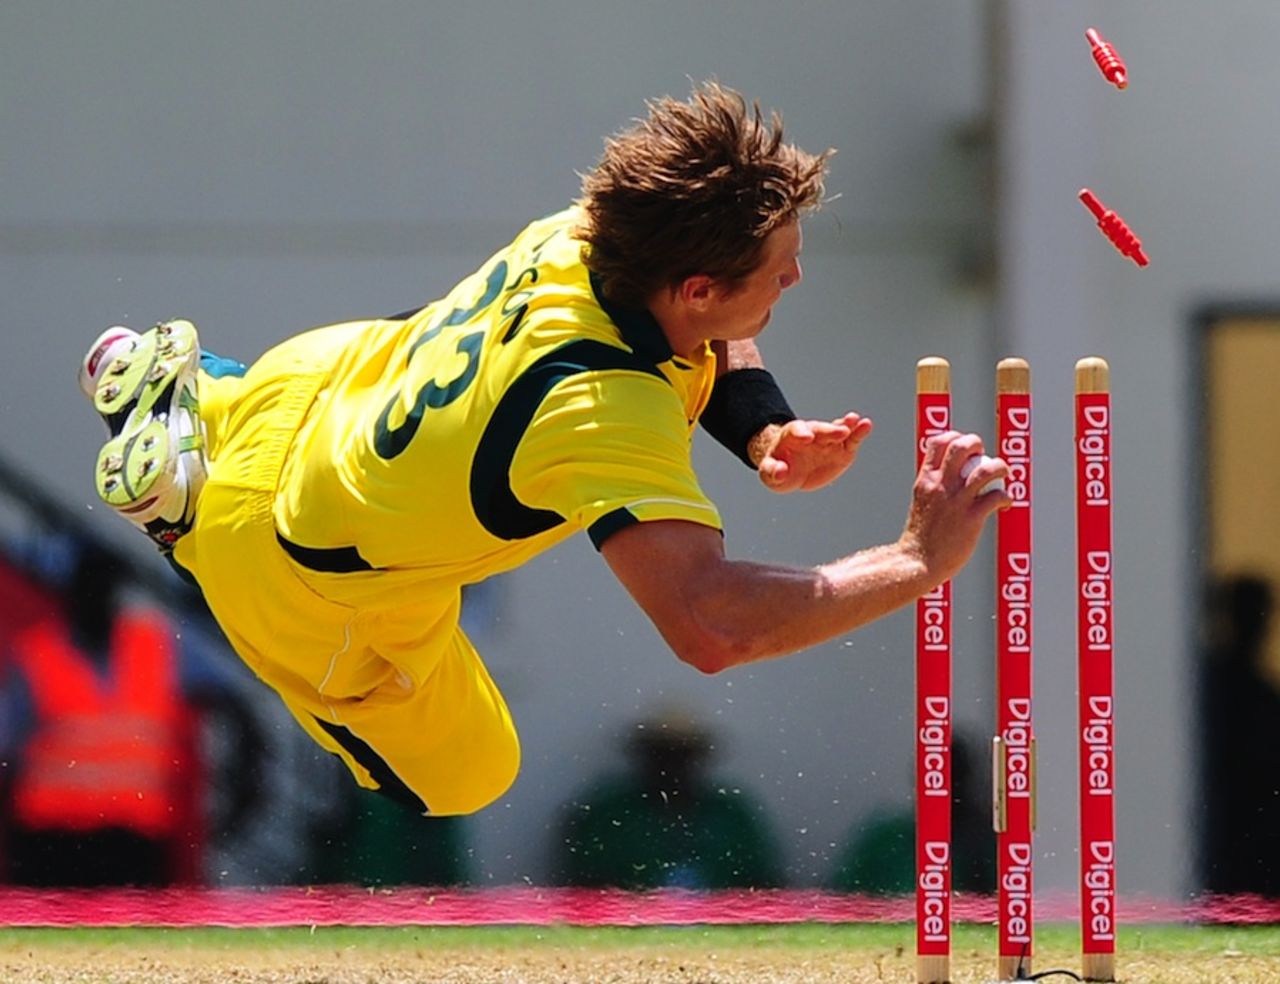 Shane Watson dives to break the stumps, West Indies v Australia, 4th ODI, Gros Islet, March 23, 2012